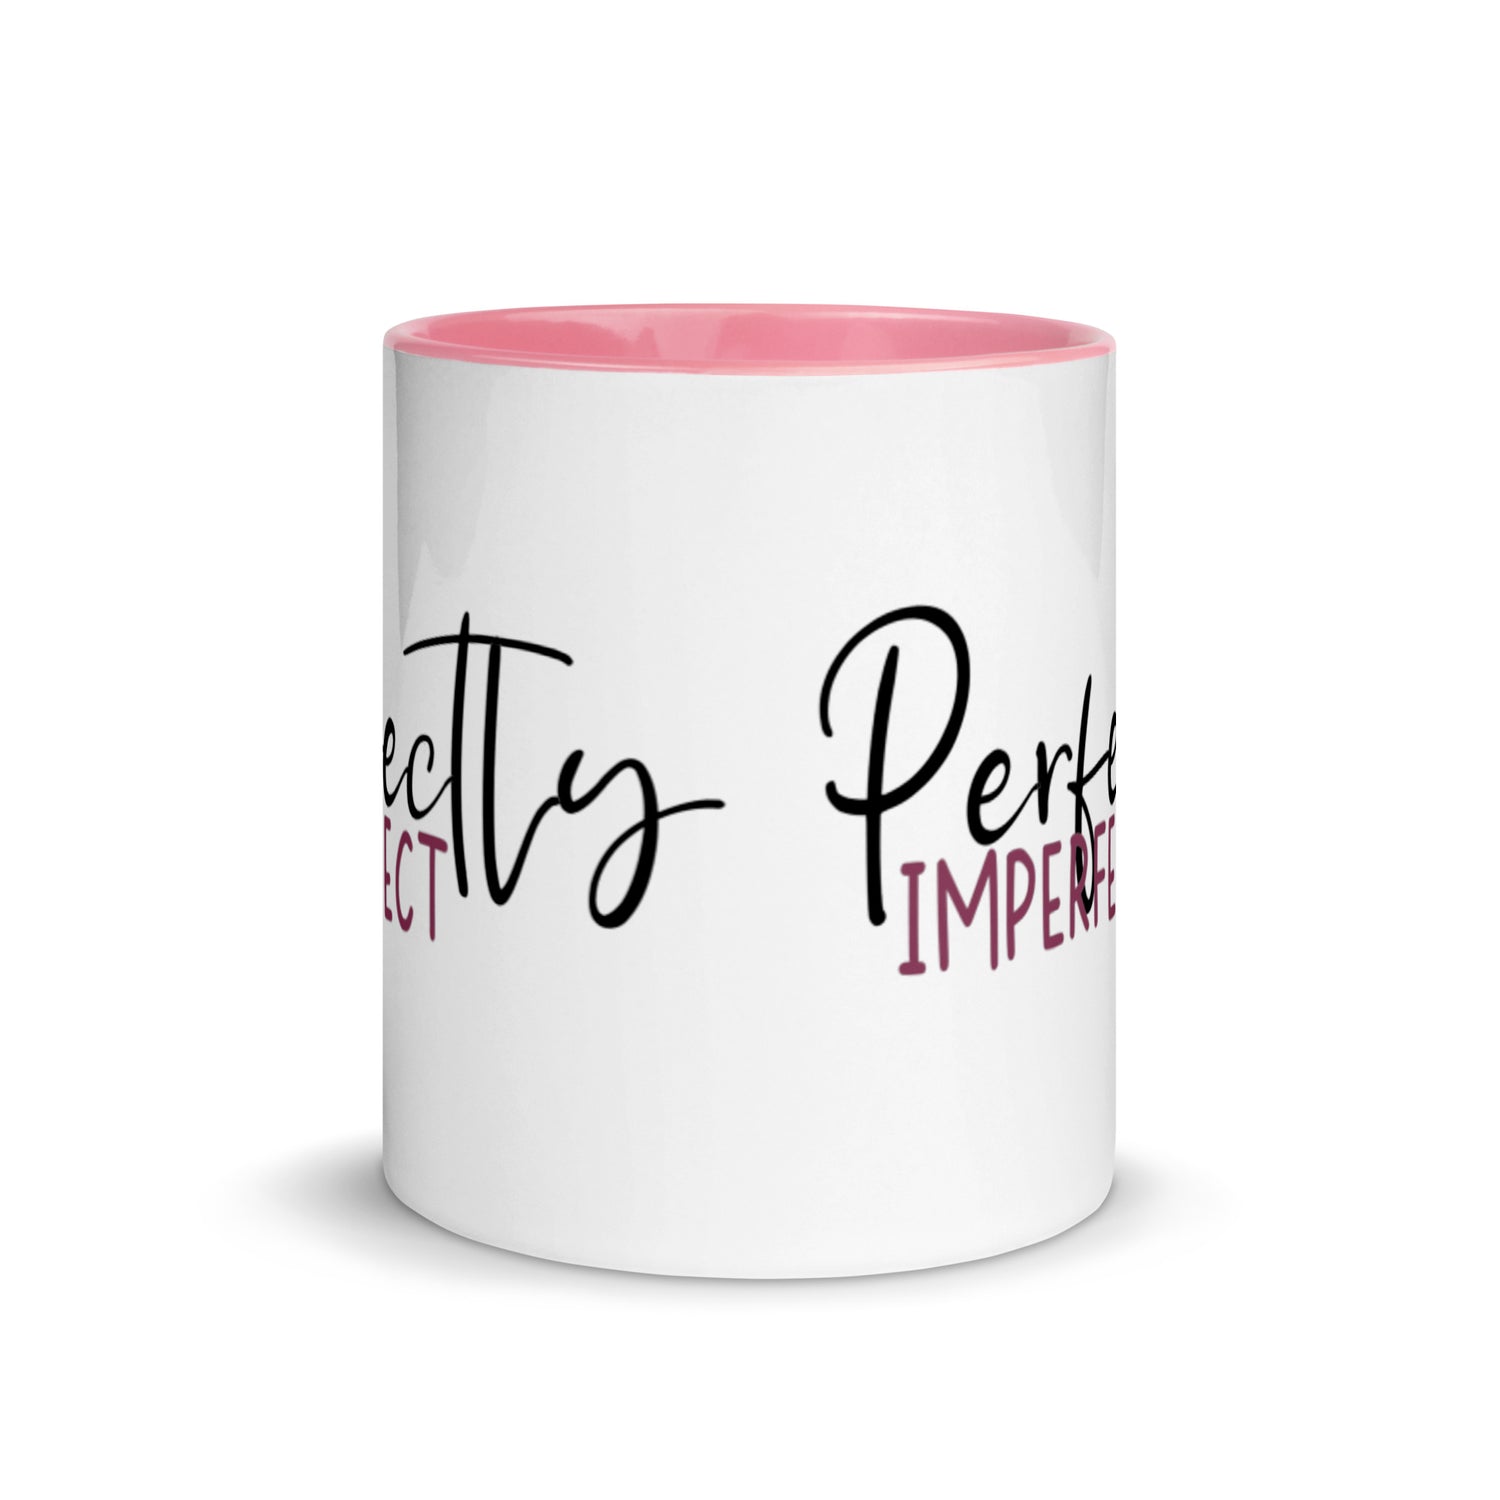 Perfectly imperfect mug with pink interior and handle